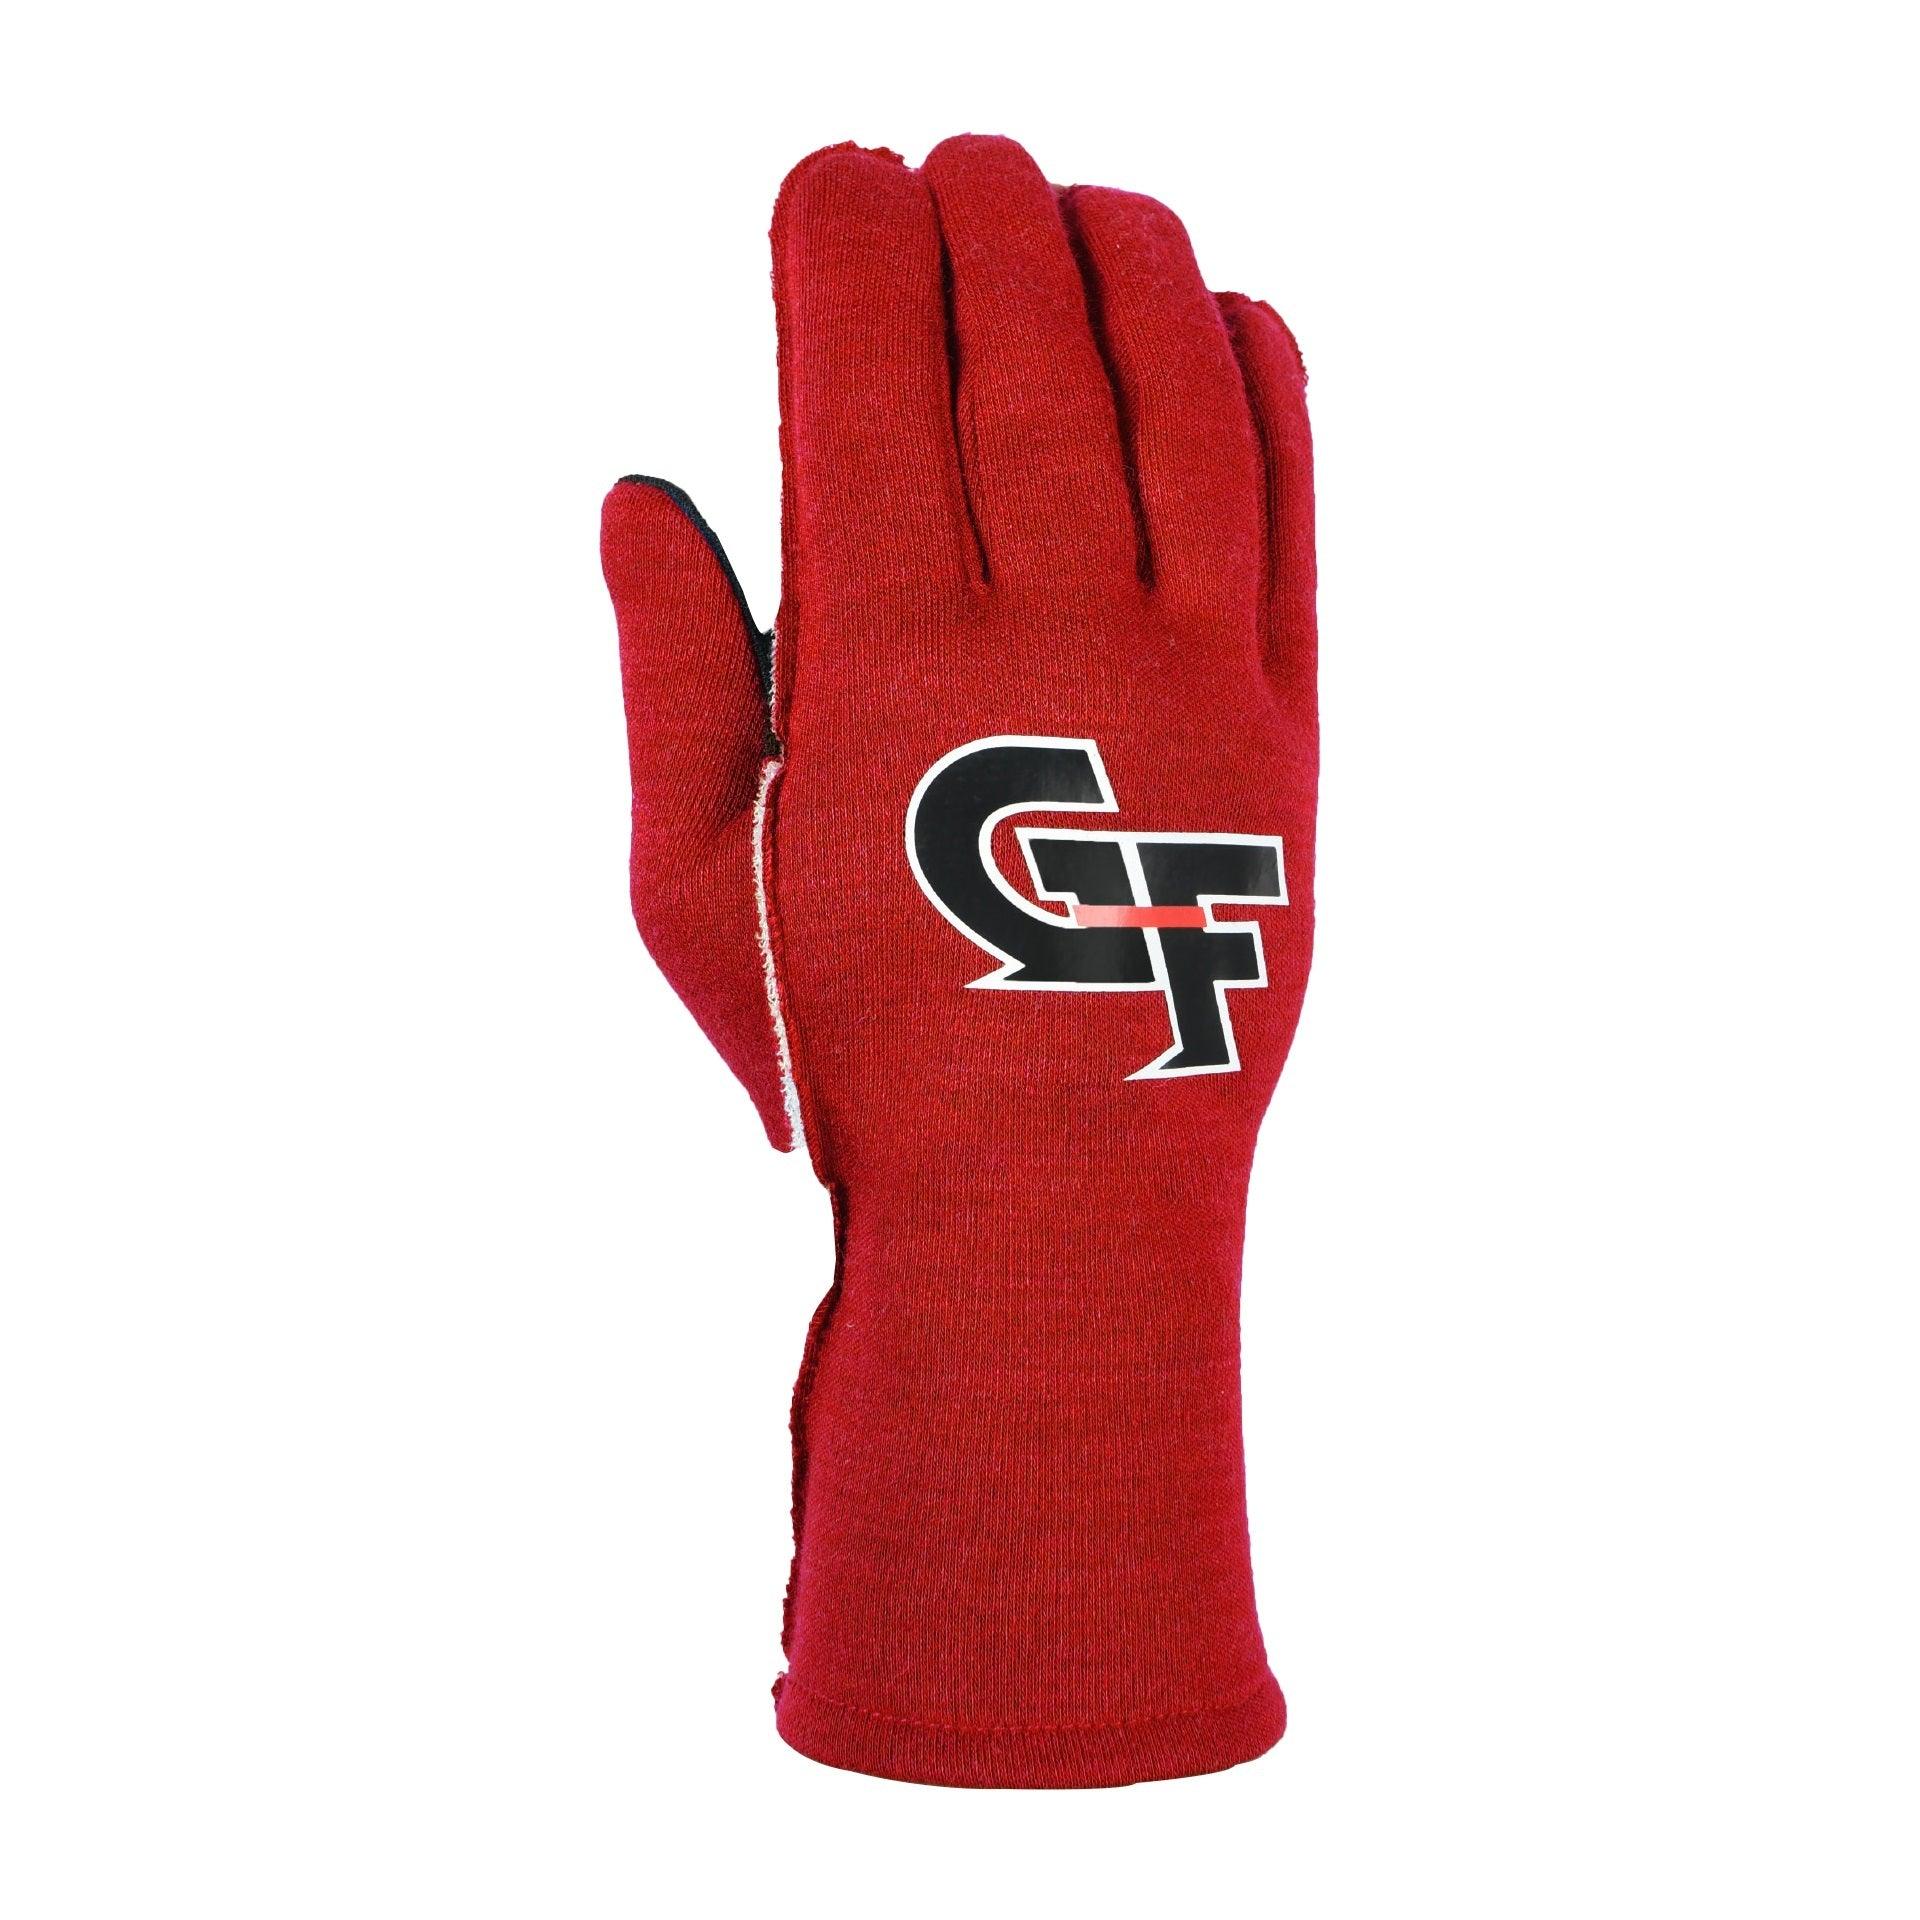 Gloves G-Limit Youth Medium Red - Burlile Performance Products